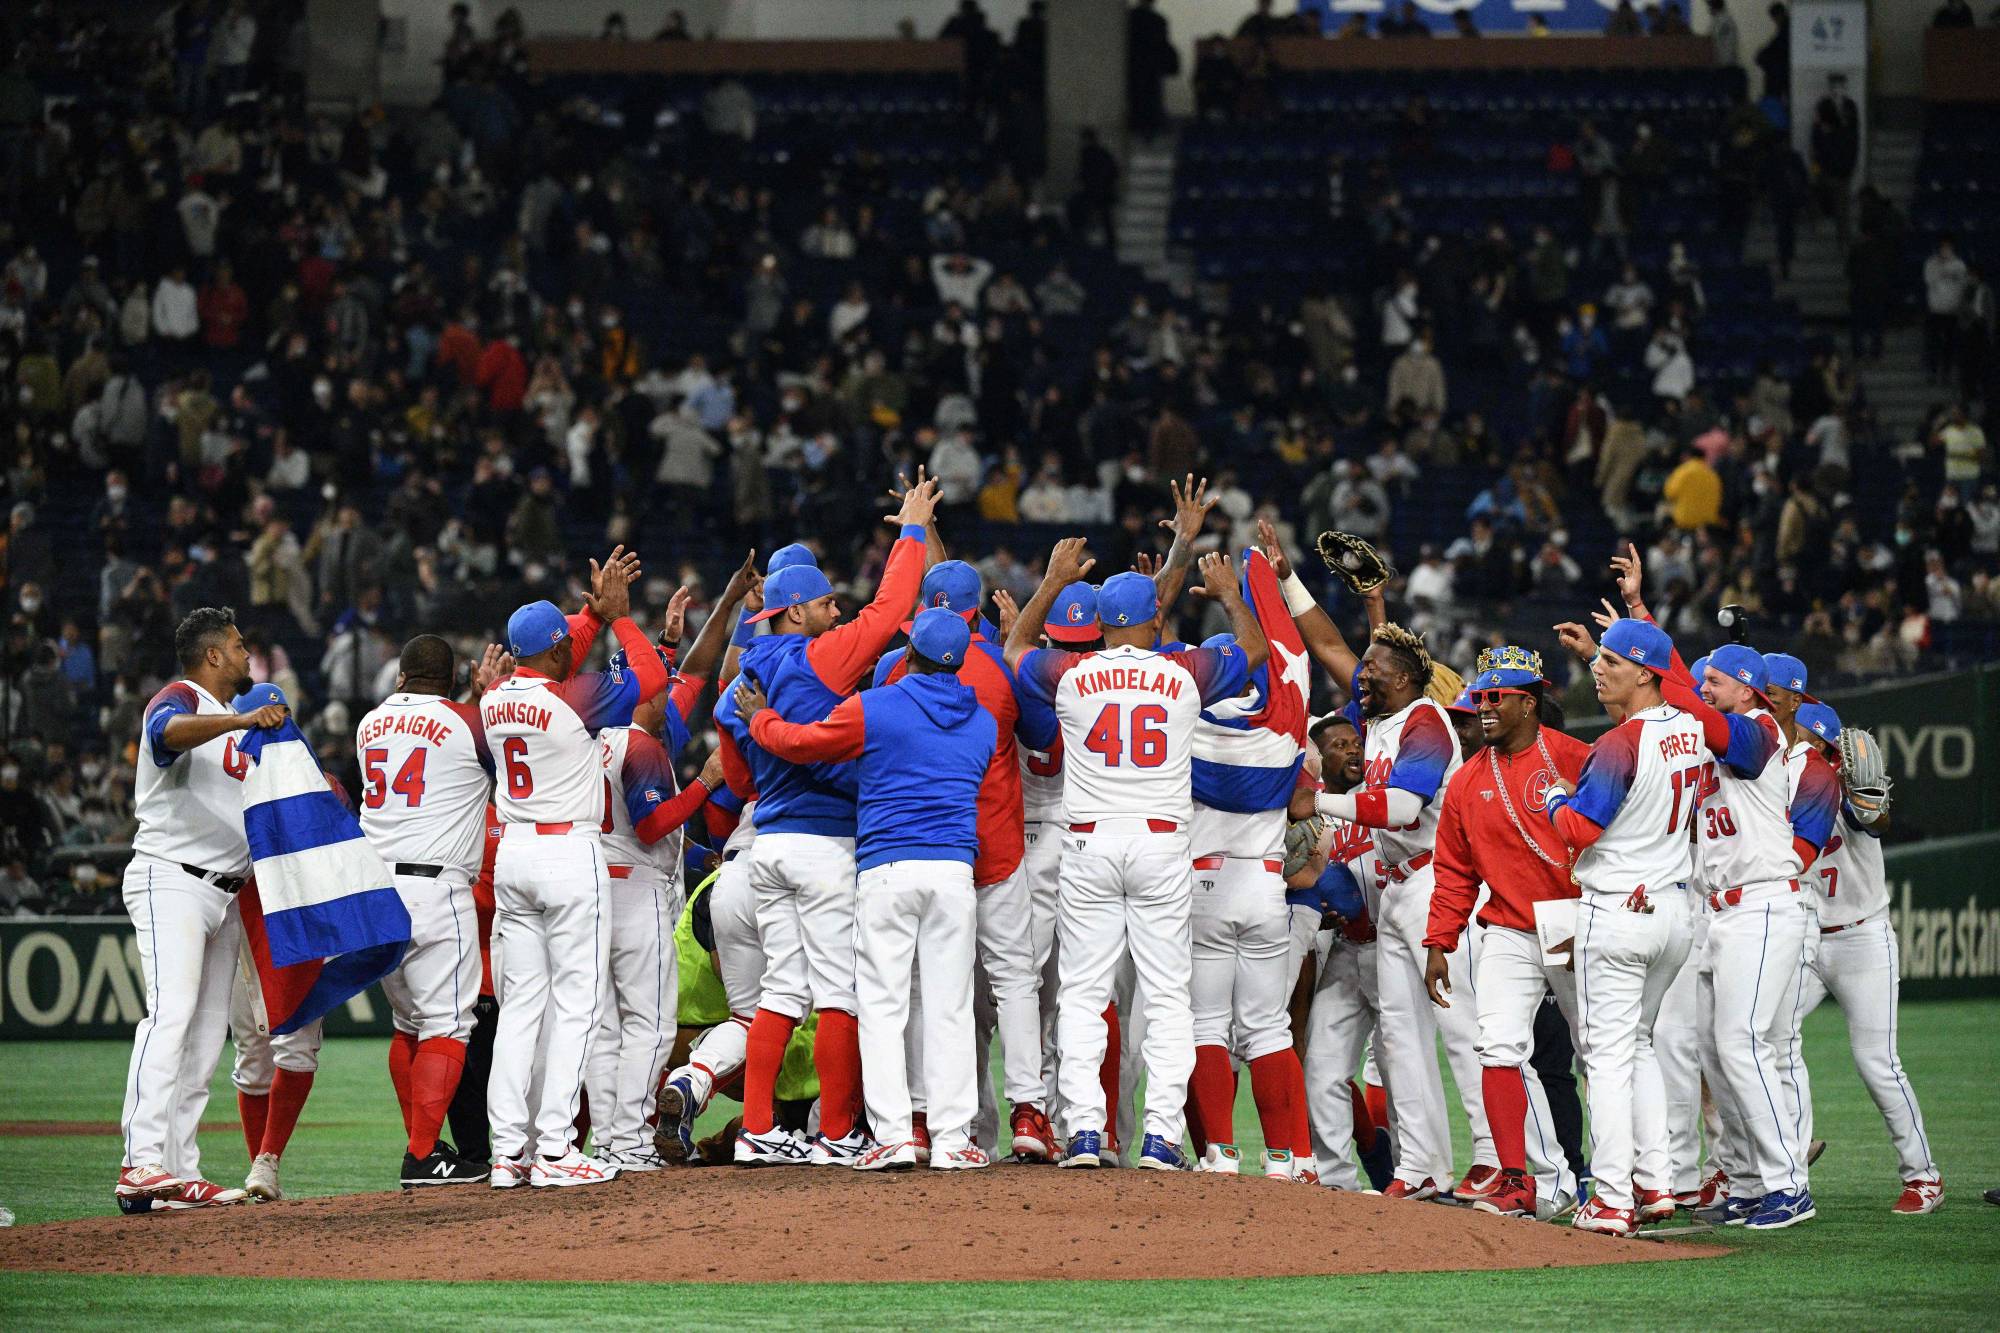 Cuban catcher defects to U.S. after WBC loss - The Japan Times